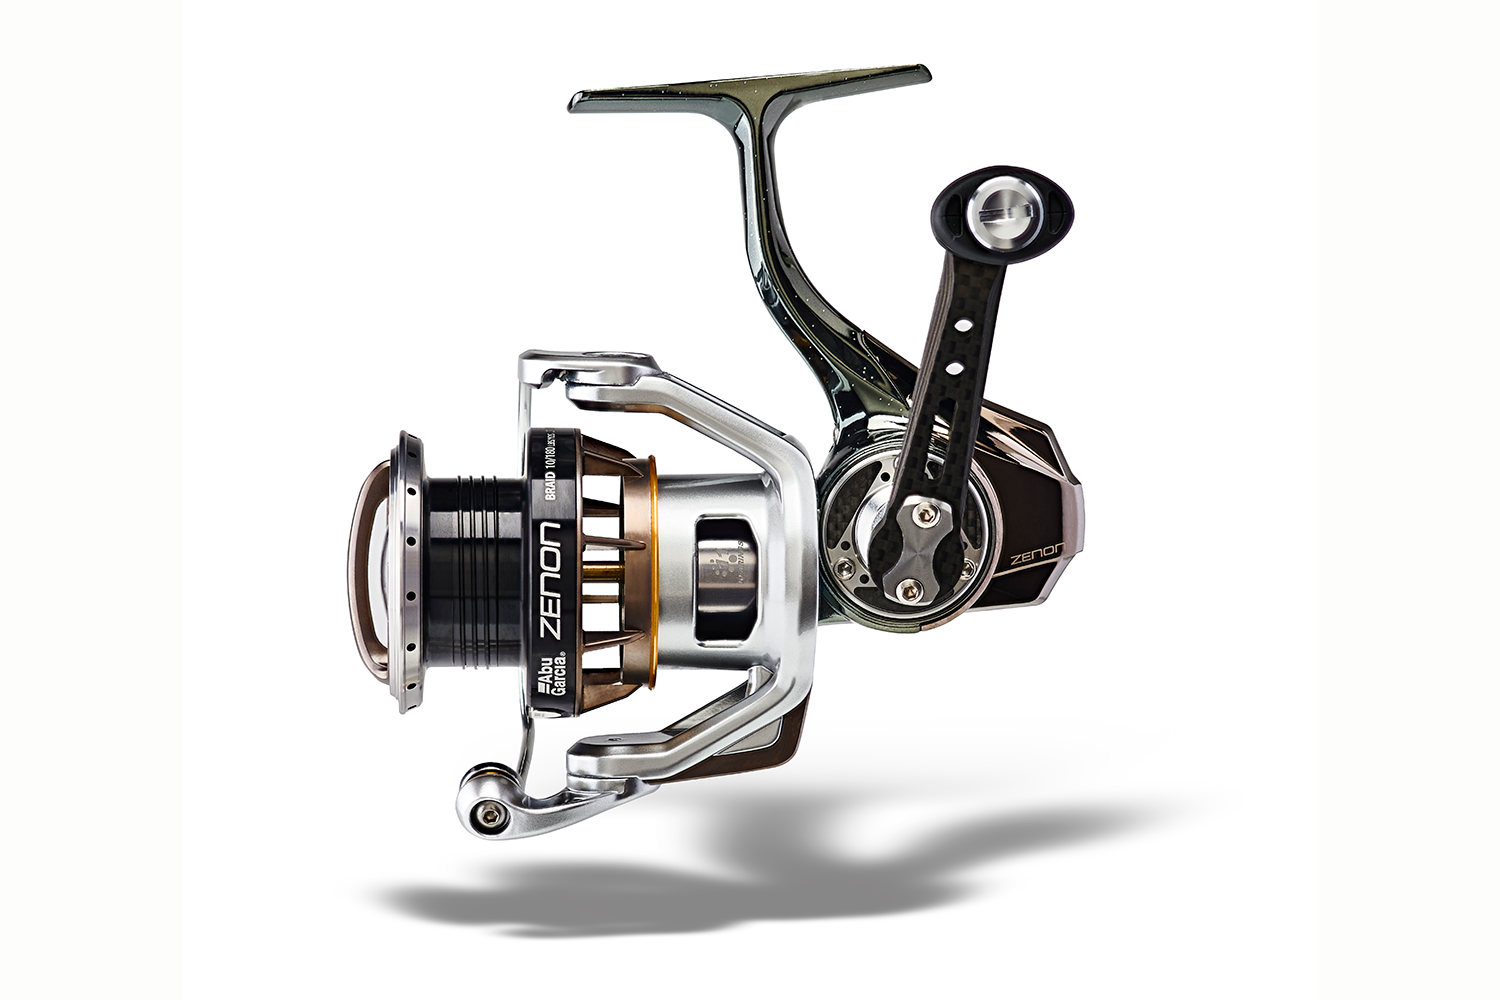 <p><b>Abu Garcia Zenon Spinning Reel</b></p>
<p>A new level of super premium spinning reels designed to be the lightest in the world. The machined gear system is housed in a lightweight contour formed magnesium body, combined with an ultralight Magnesium rotor and hybrid spool design. Available March 2021.   </p>
<p><a href=